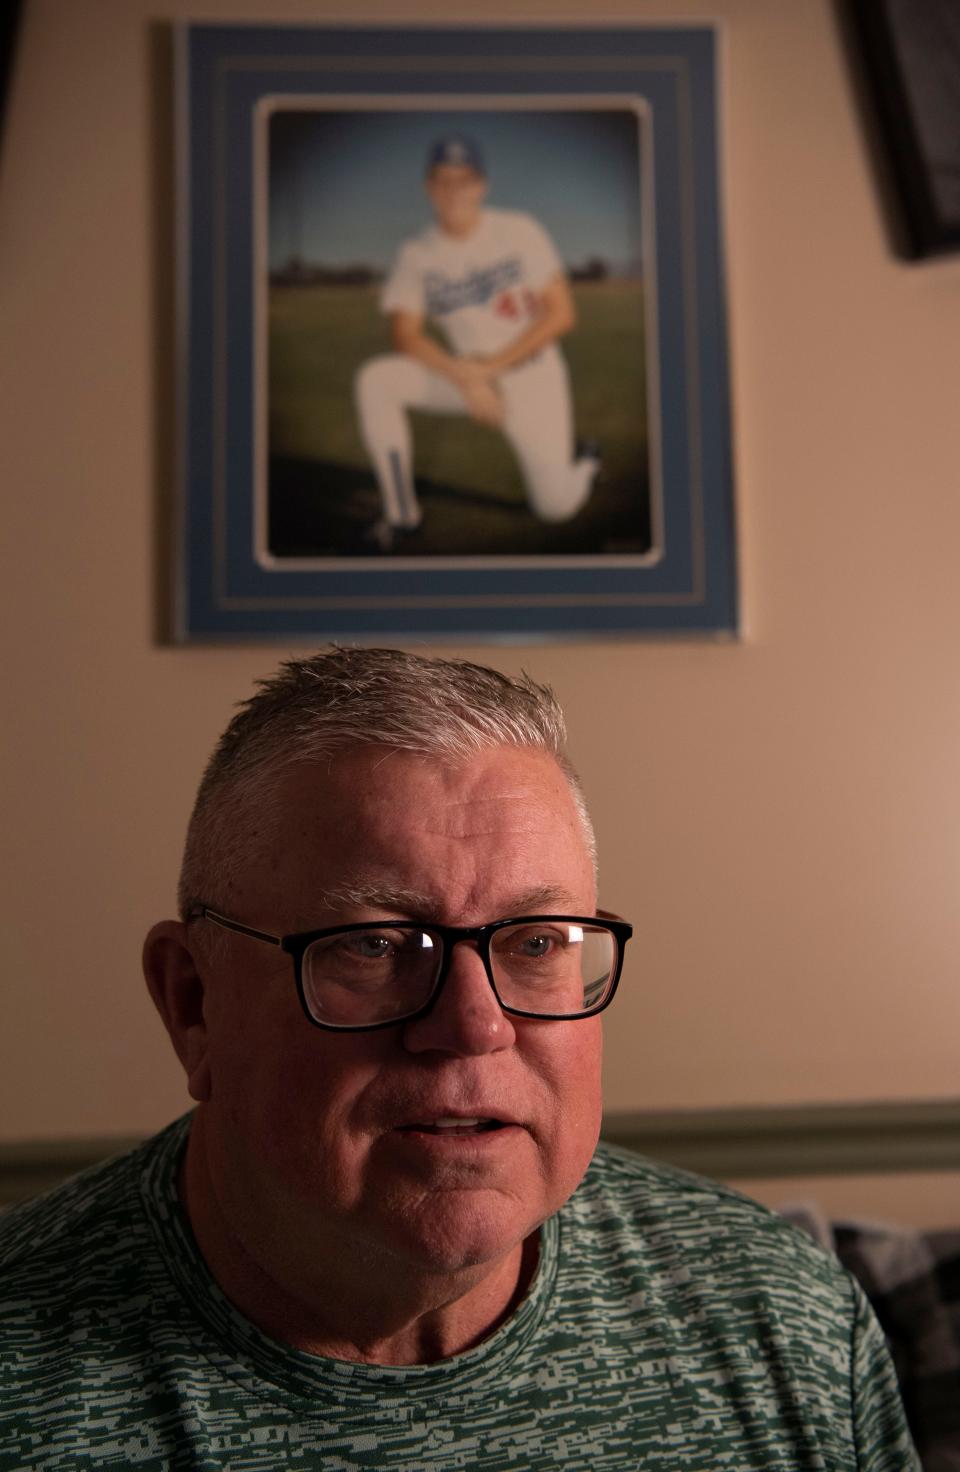 Jeff Edwards, sits in front of an old portrait of himself from when he played baseball, at his home in Mt. Juliet, Tenn., Thursday, March 28, 2024.